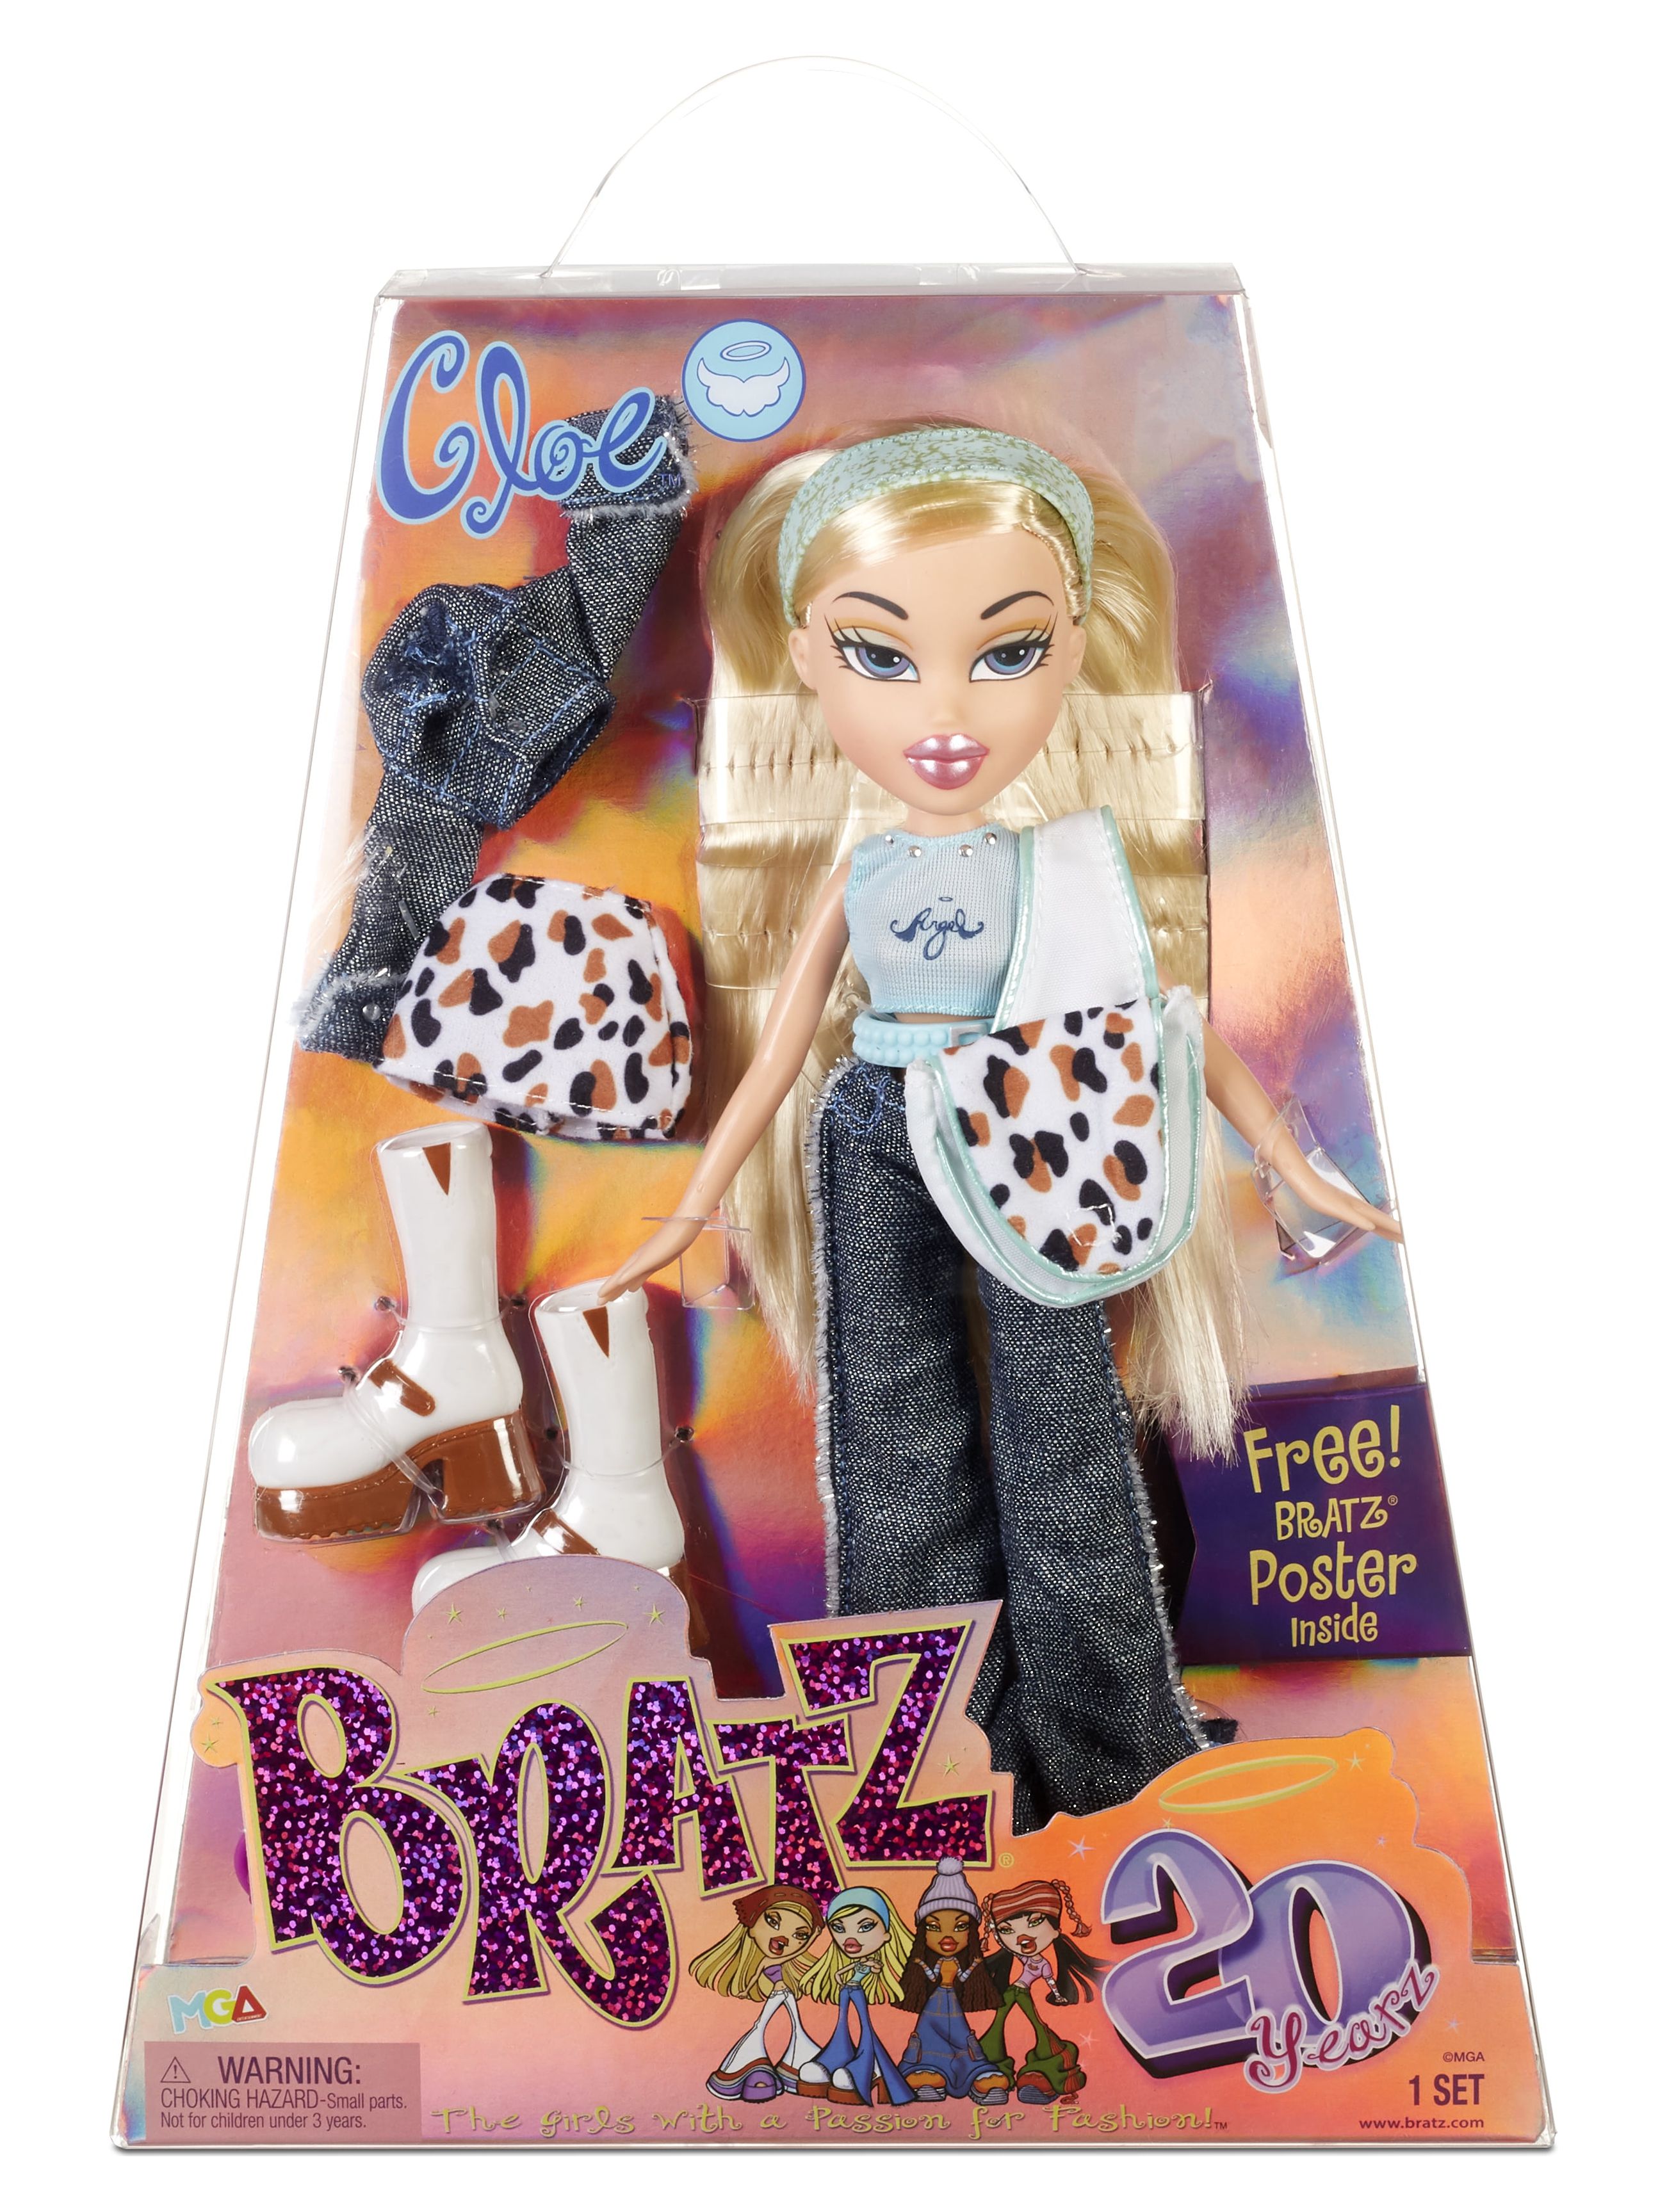 Bratz 20 Yearz Special Edition Original Fashion Doll Cloe, Great Gift for Children Ages 6, 7, 8+ - image 1 of 8